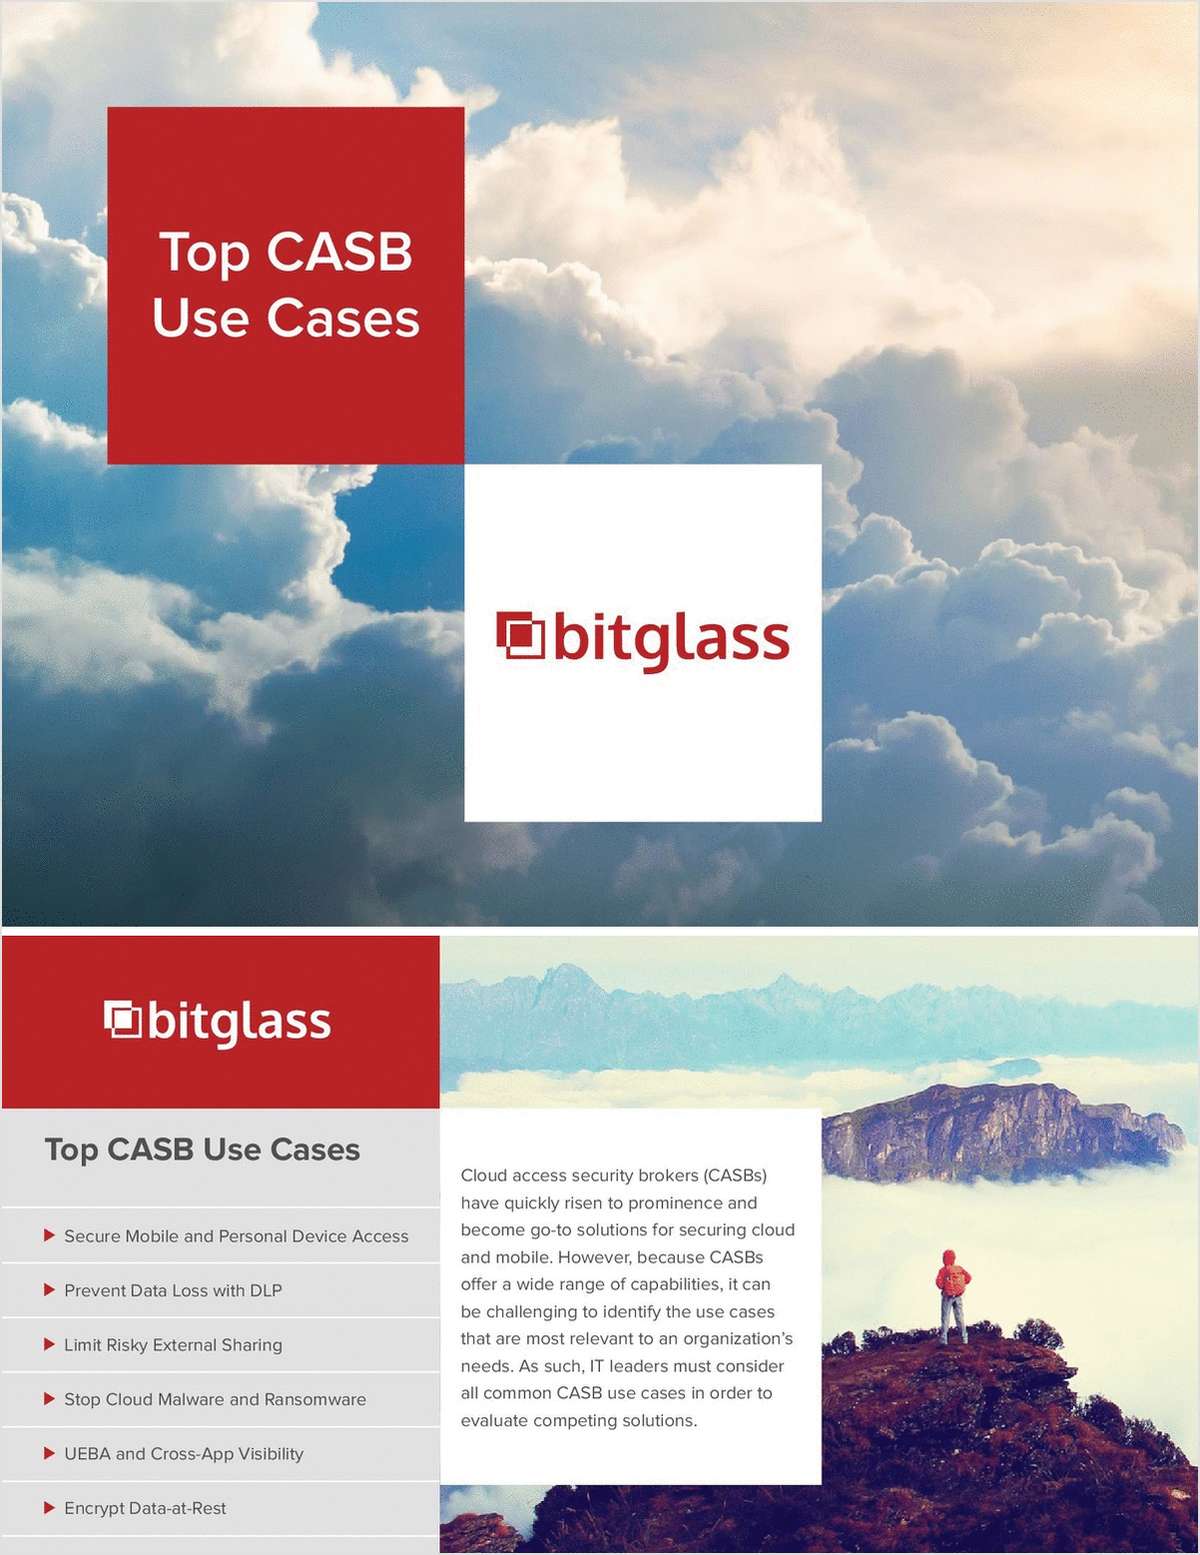 Top CASB Use Cases